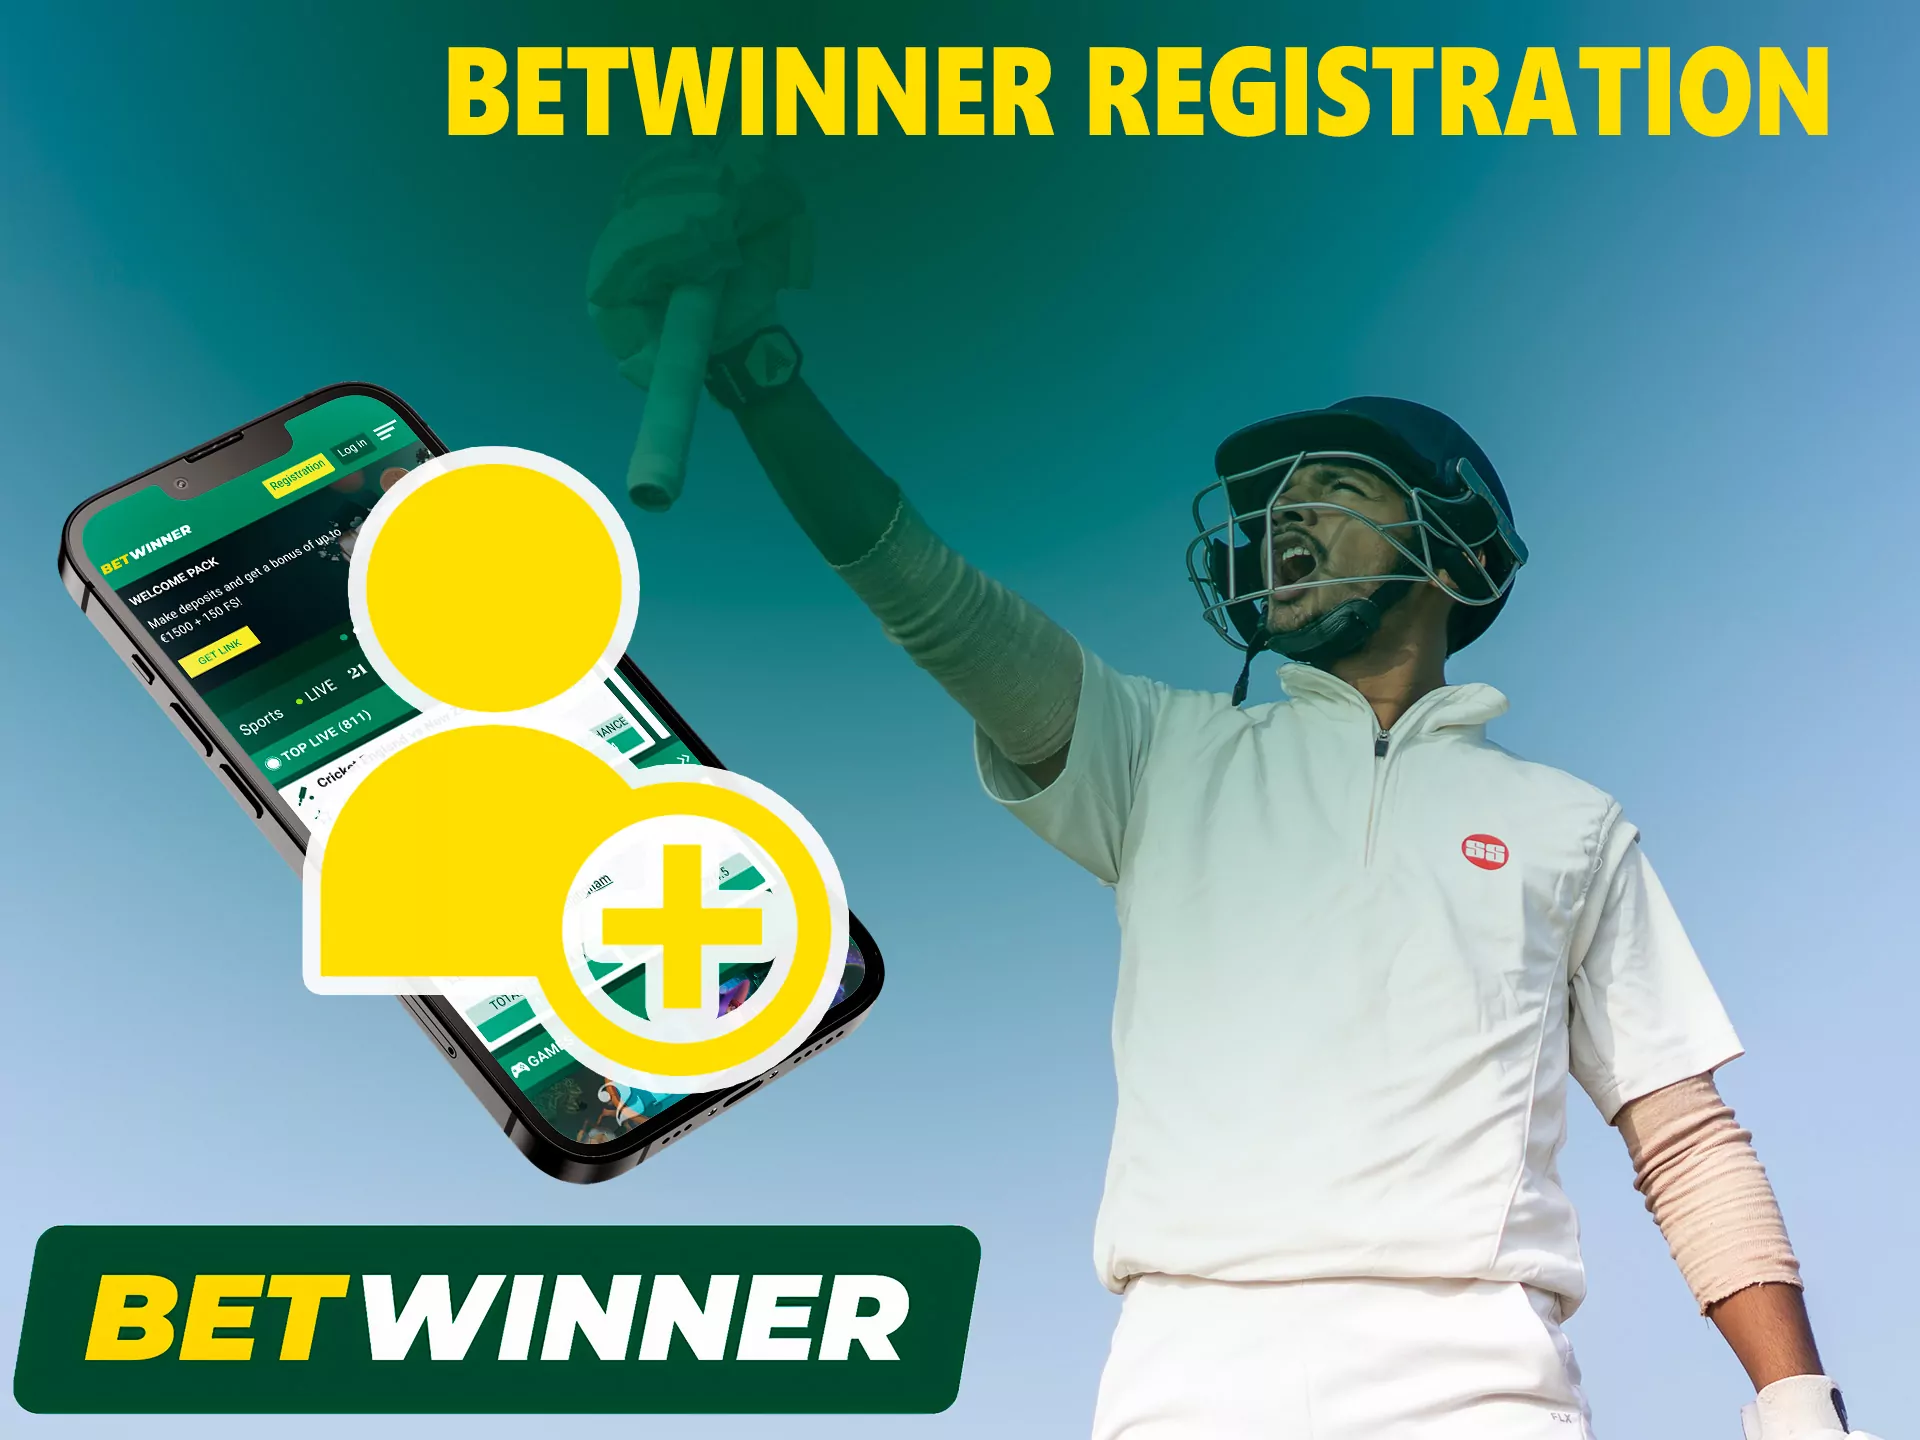 Registration at Betwinner BD is very easy, just follow our guide.